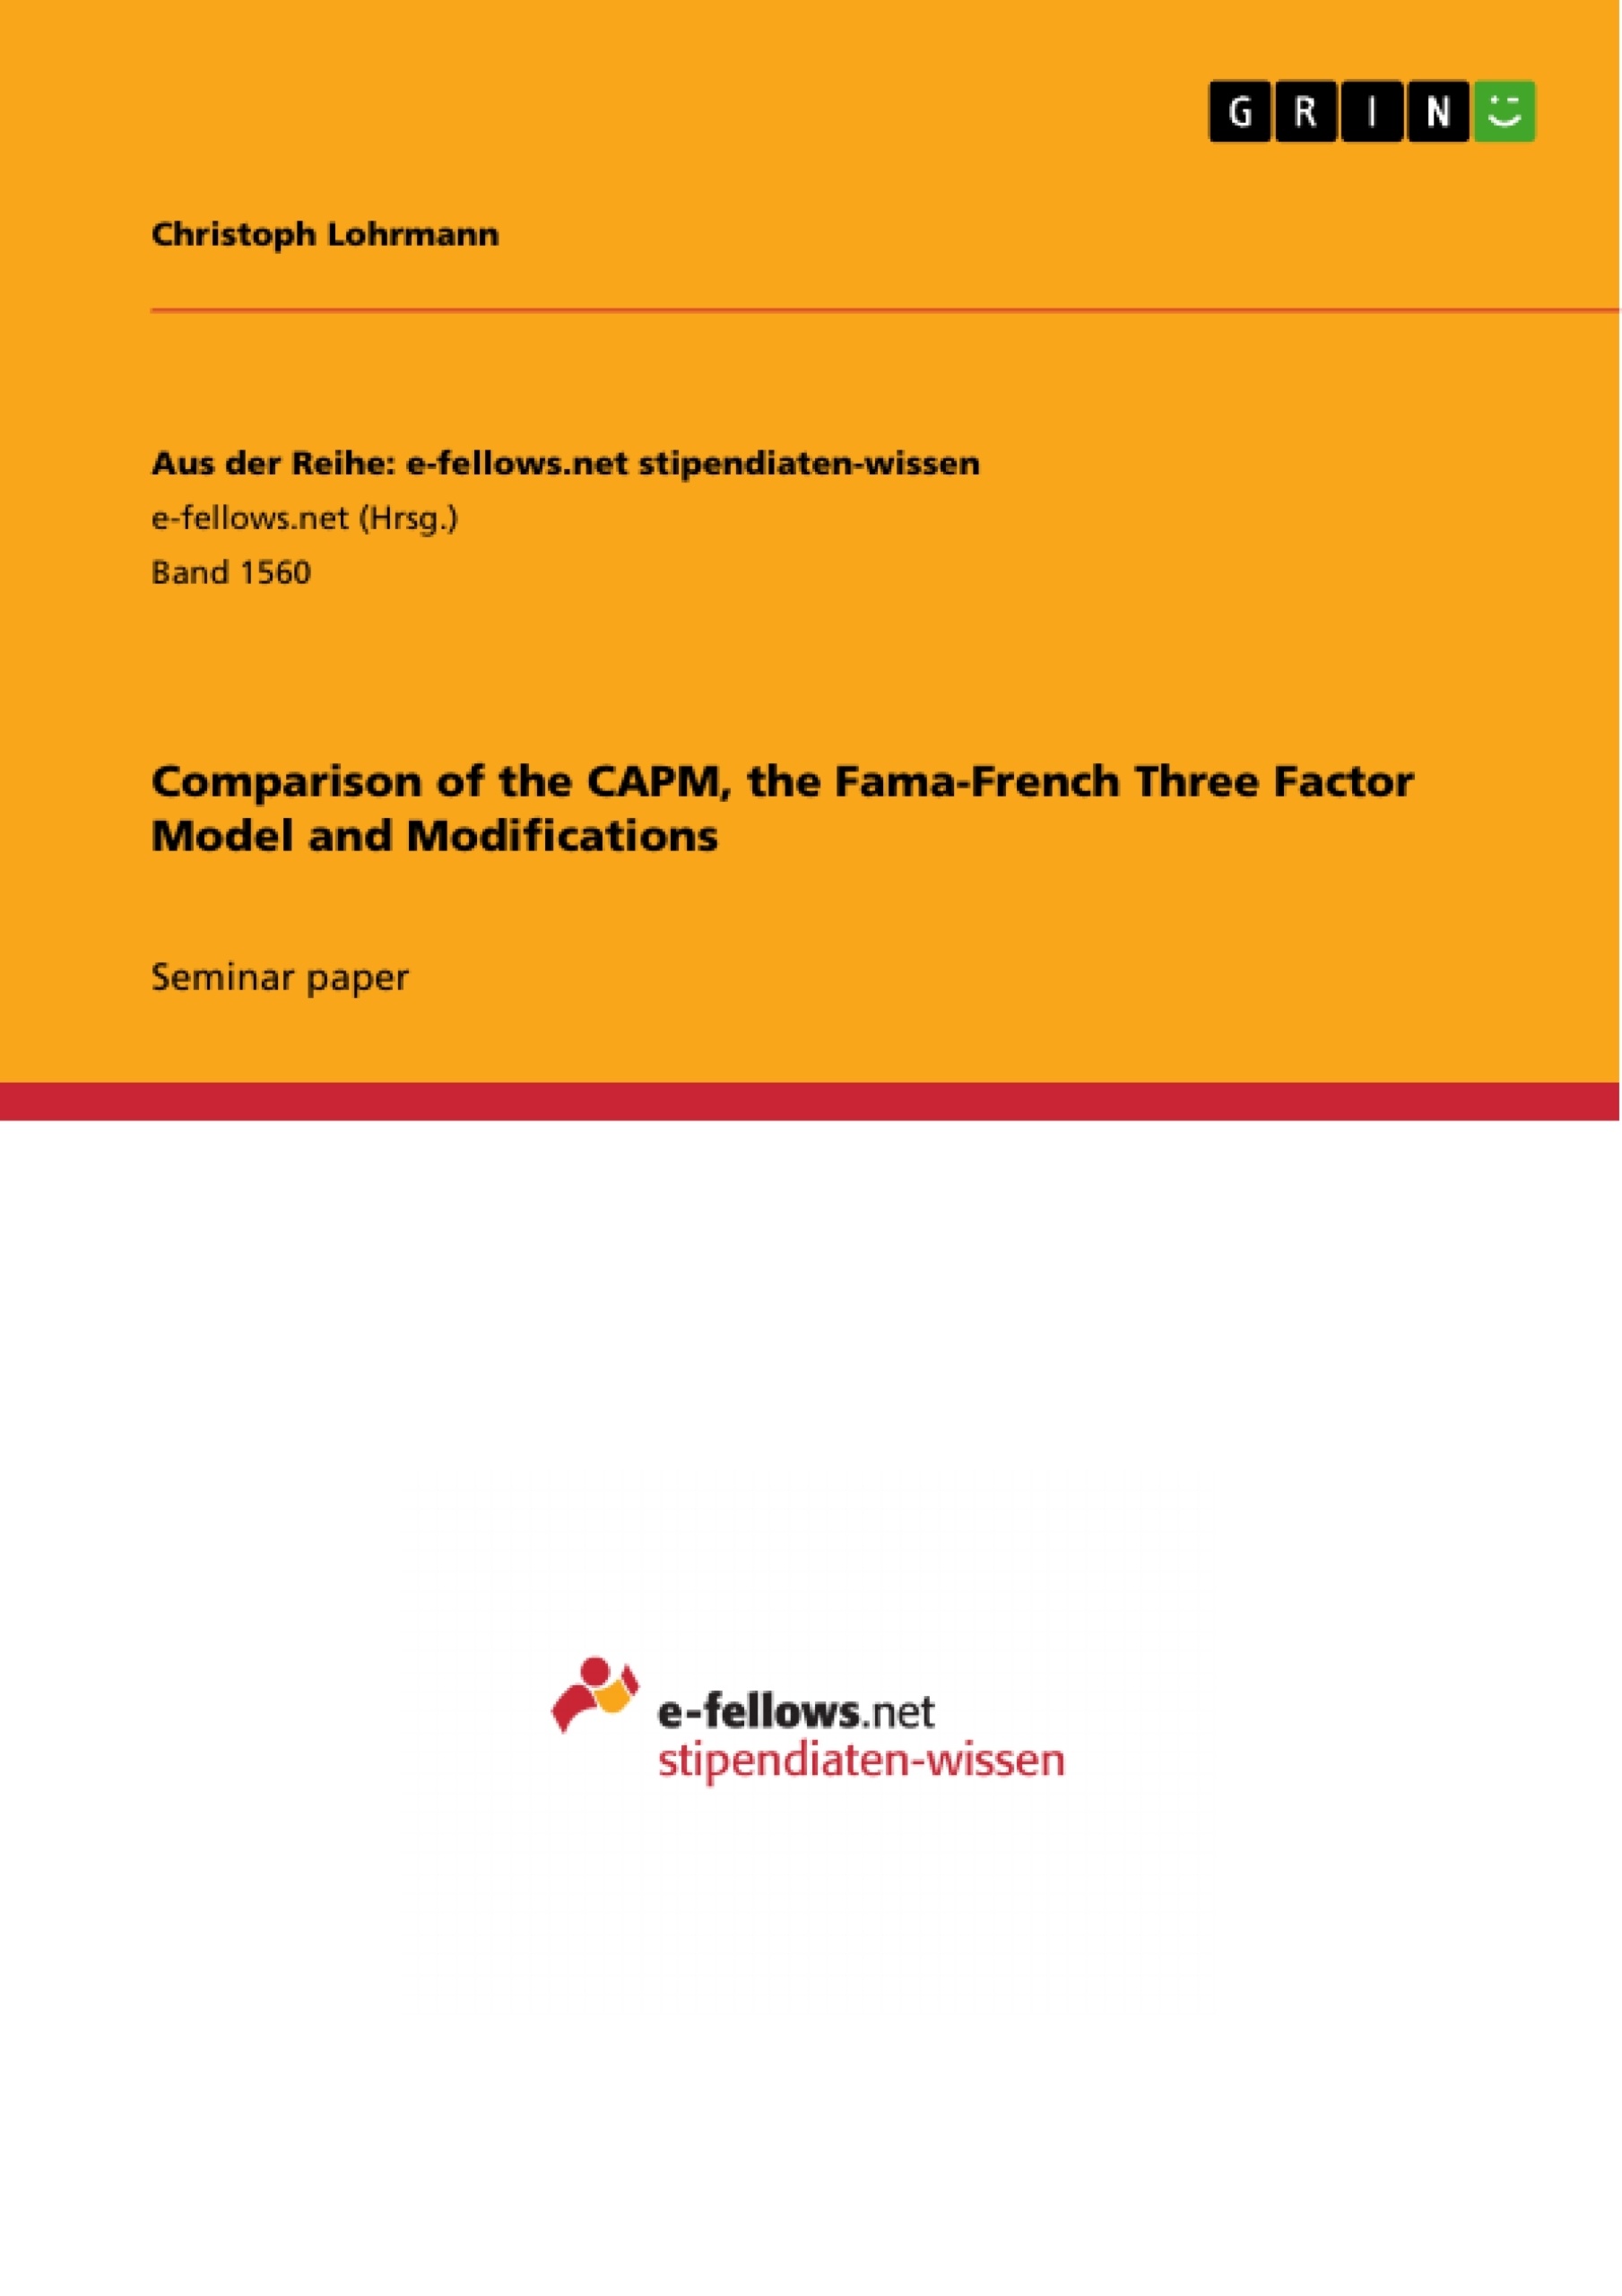 Titre: Comparison of the CAPM, the Fama-French Three Factor Model and Modifications